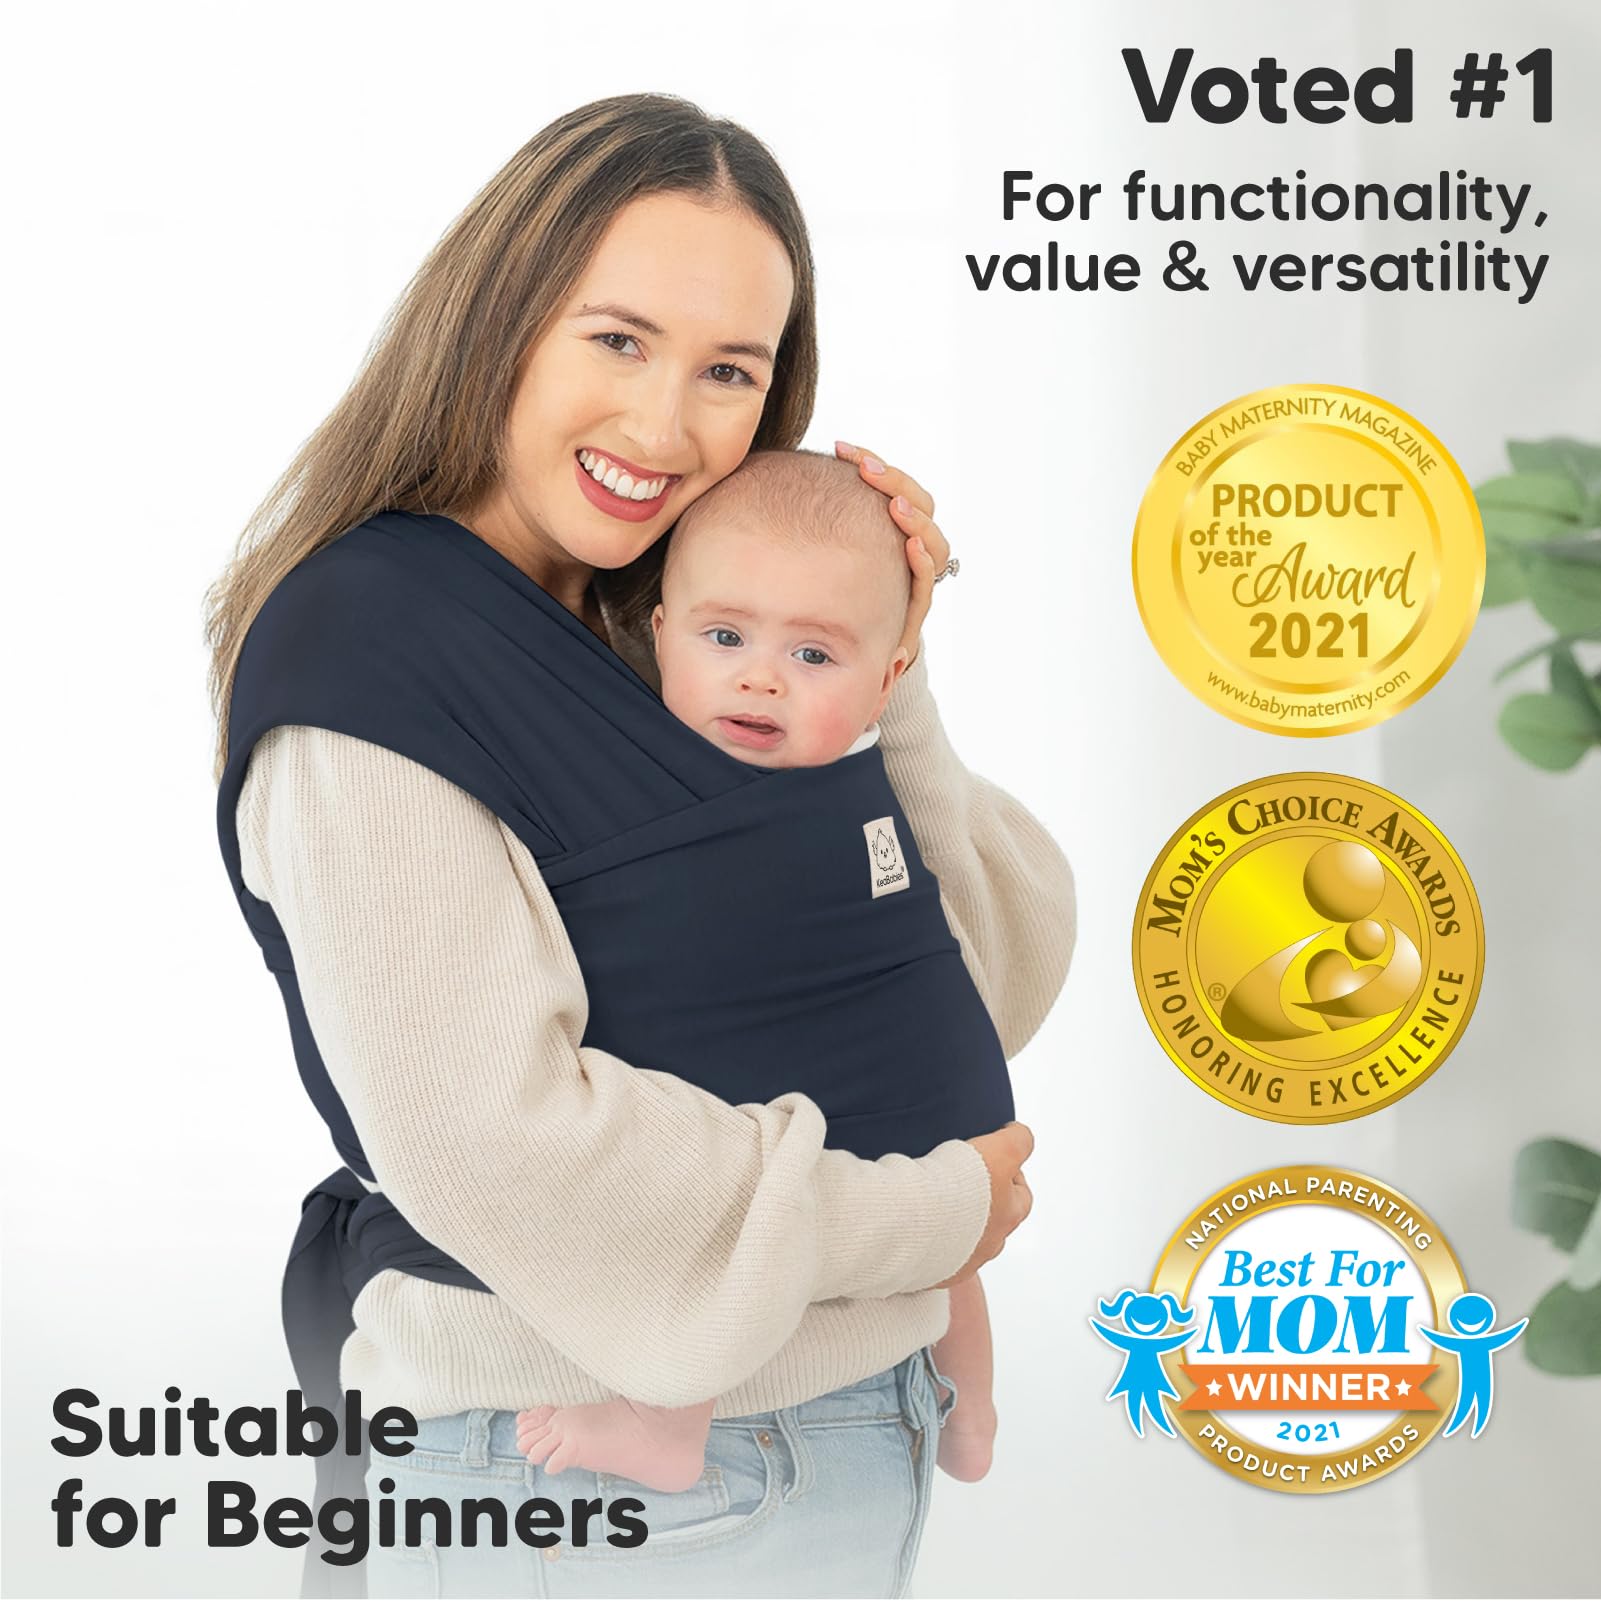 KeaBabies Baby Wrap Carrier and KeaBabies Diaper Caddy Organizer - All in 1 Original Breathable Baby Sling, Baby Organizer for Nursery, Lightweight,Hands Free Baby Carrier Sling